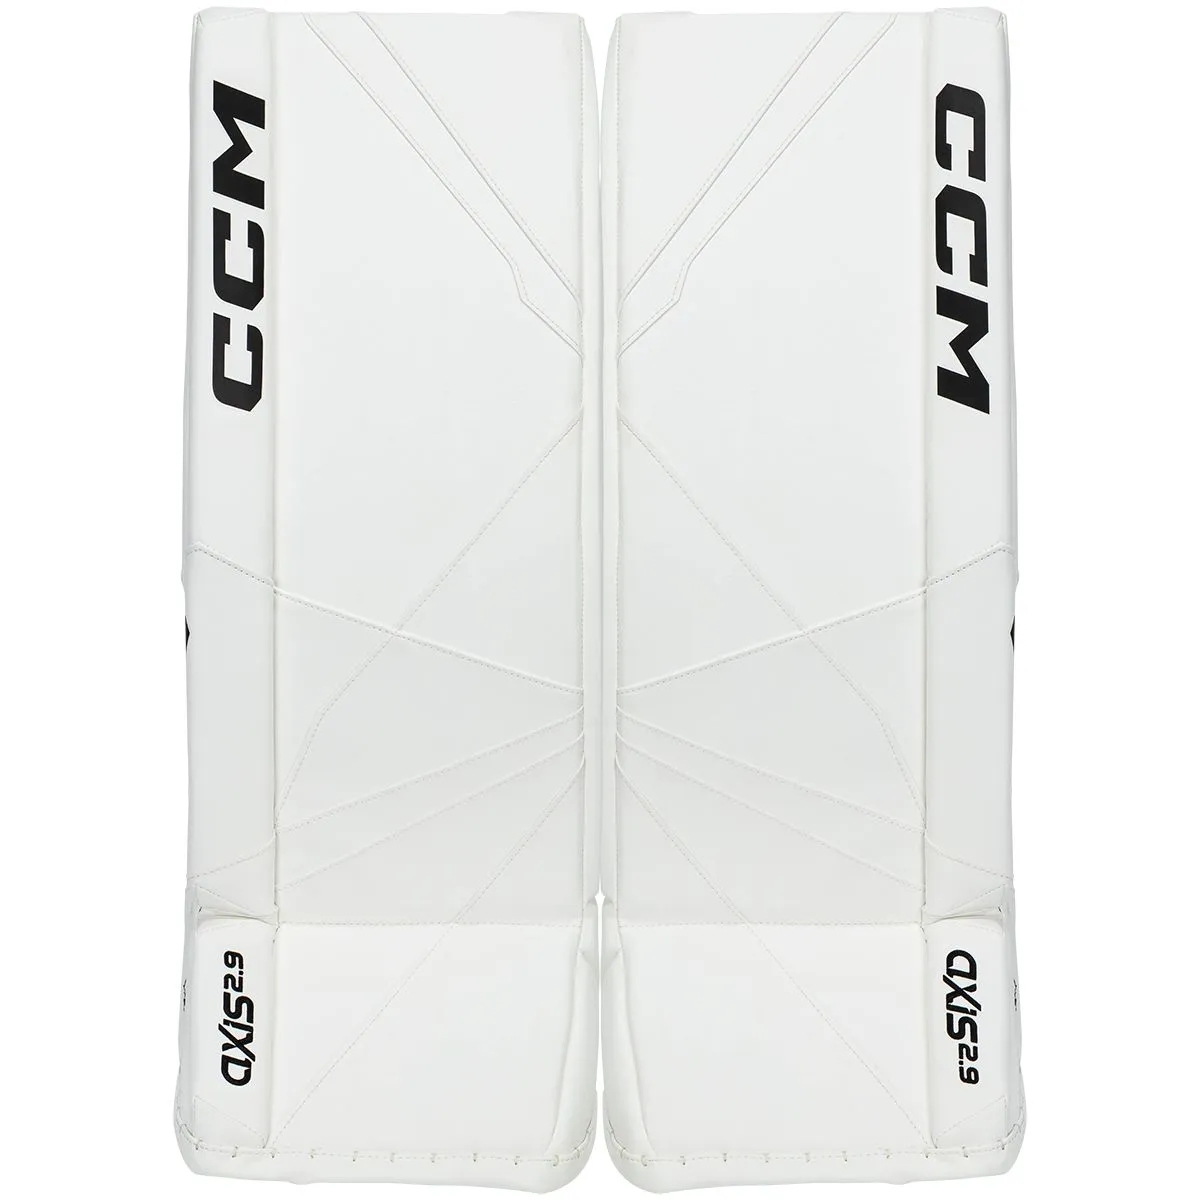 CCM AXIS A2.9 Int. Goalie Leg Padsproduct zoom image #1